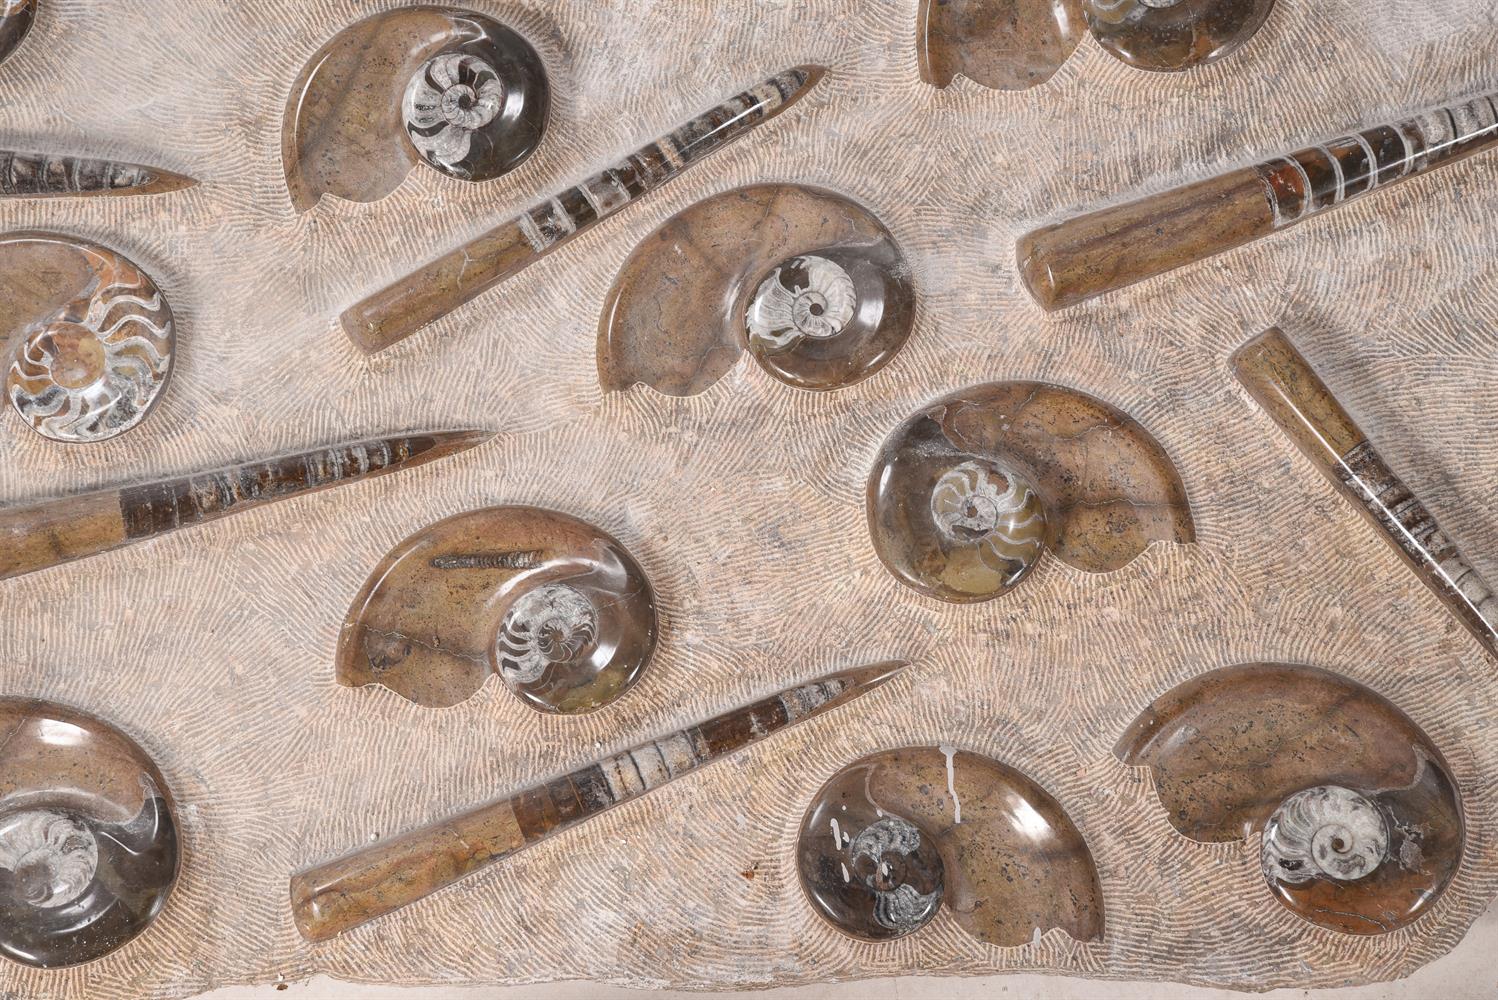 A LARGE POLISHED AND CHISELLED FOSSIL GROUP - Image 2 of 4